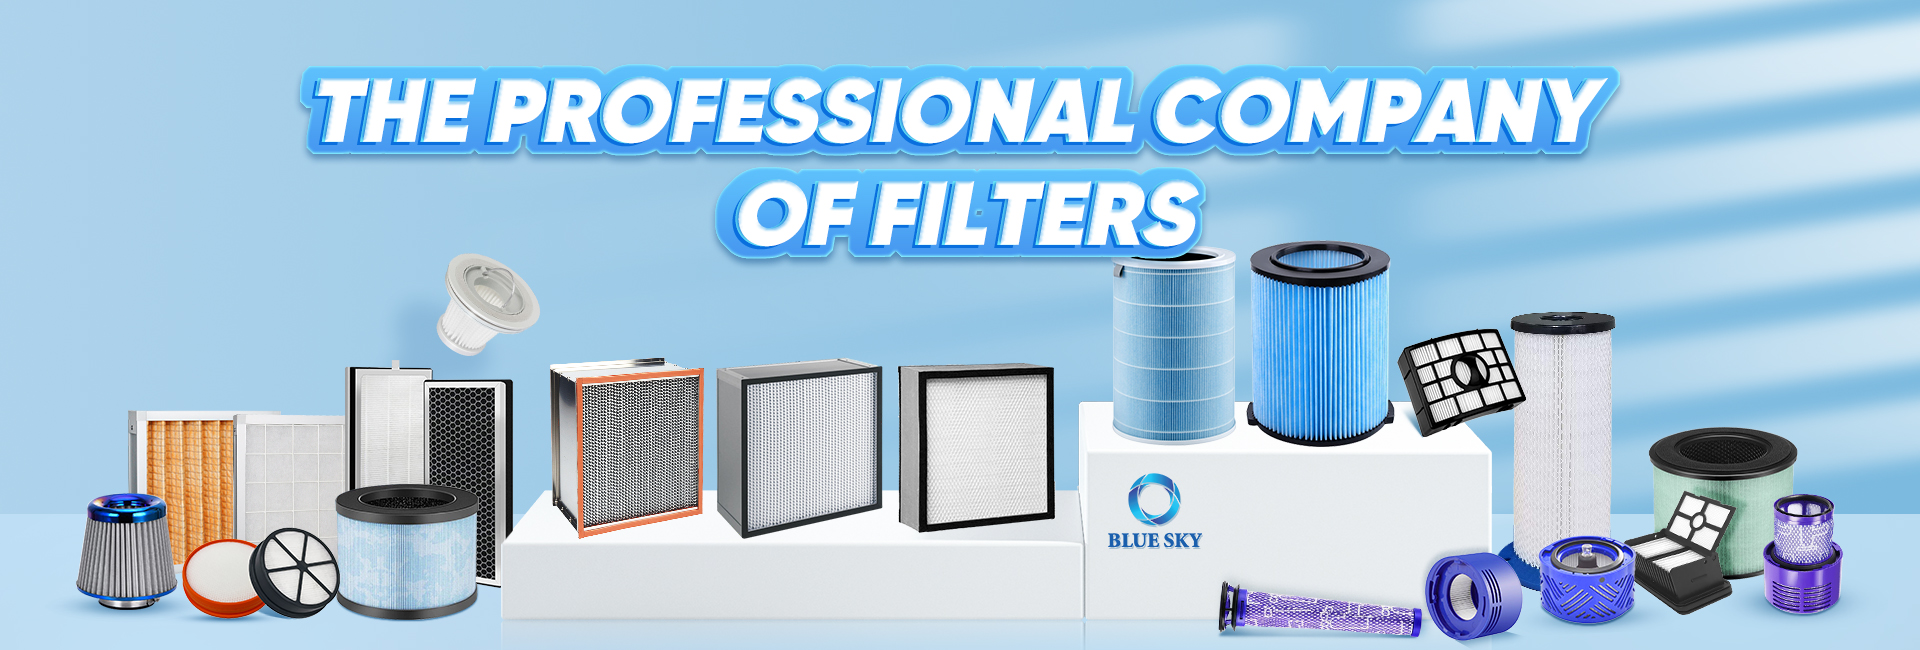 The Professional Company of Filters